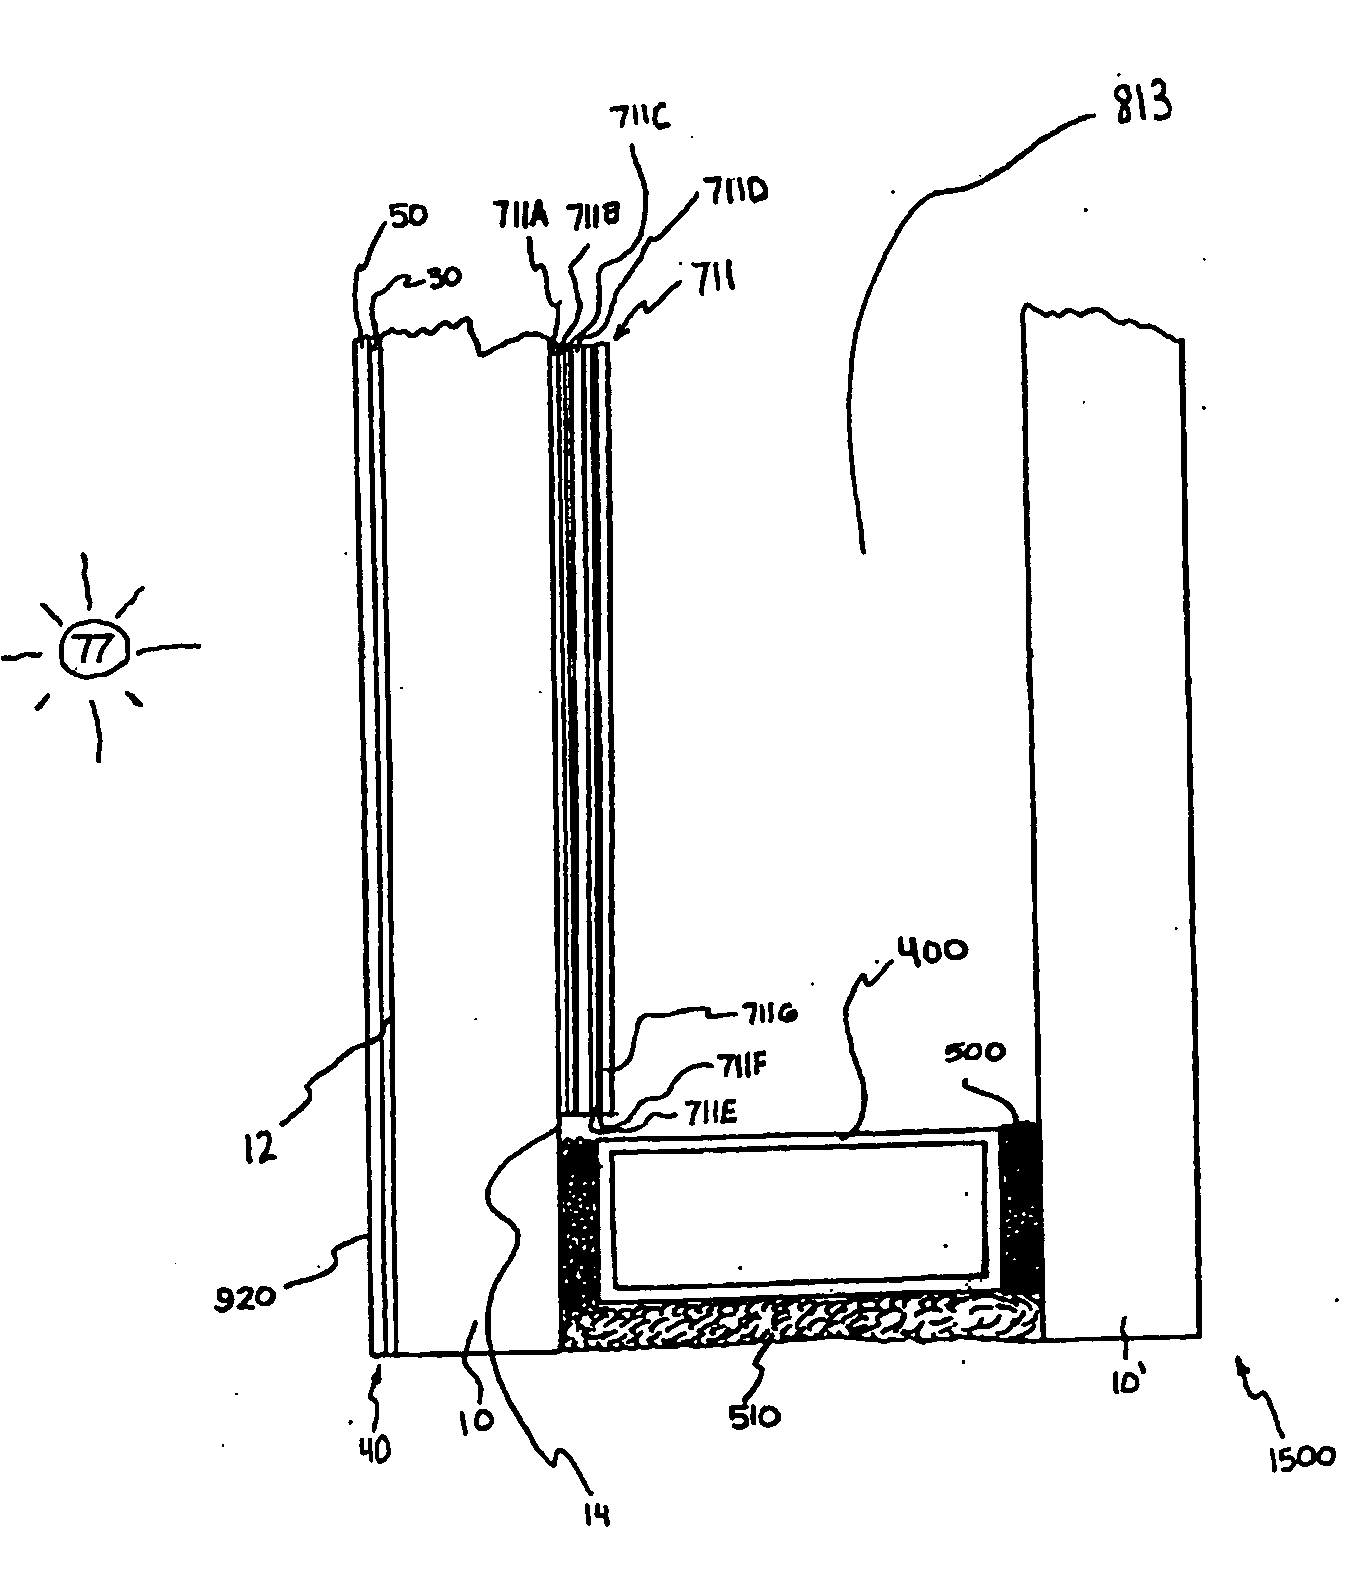 Methods and equipment for depositing hydrophilic coatings, and deposition technologies for thin films